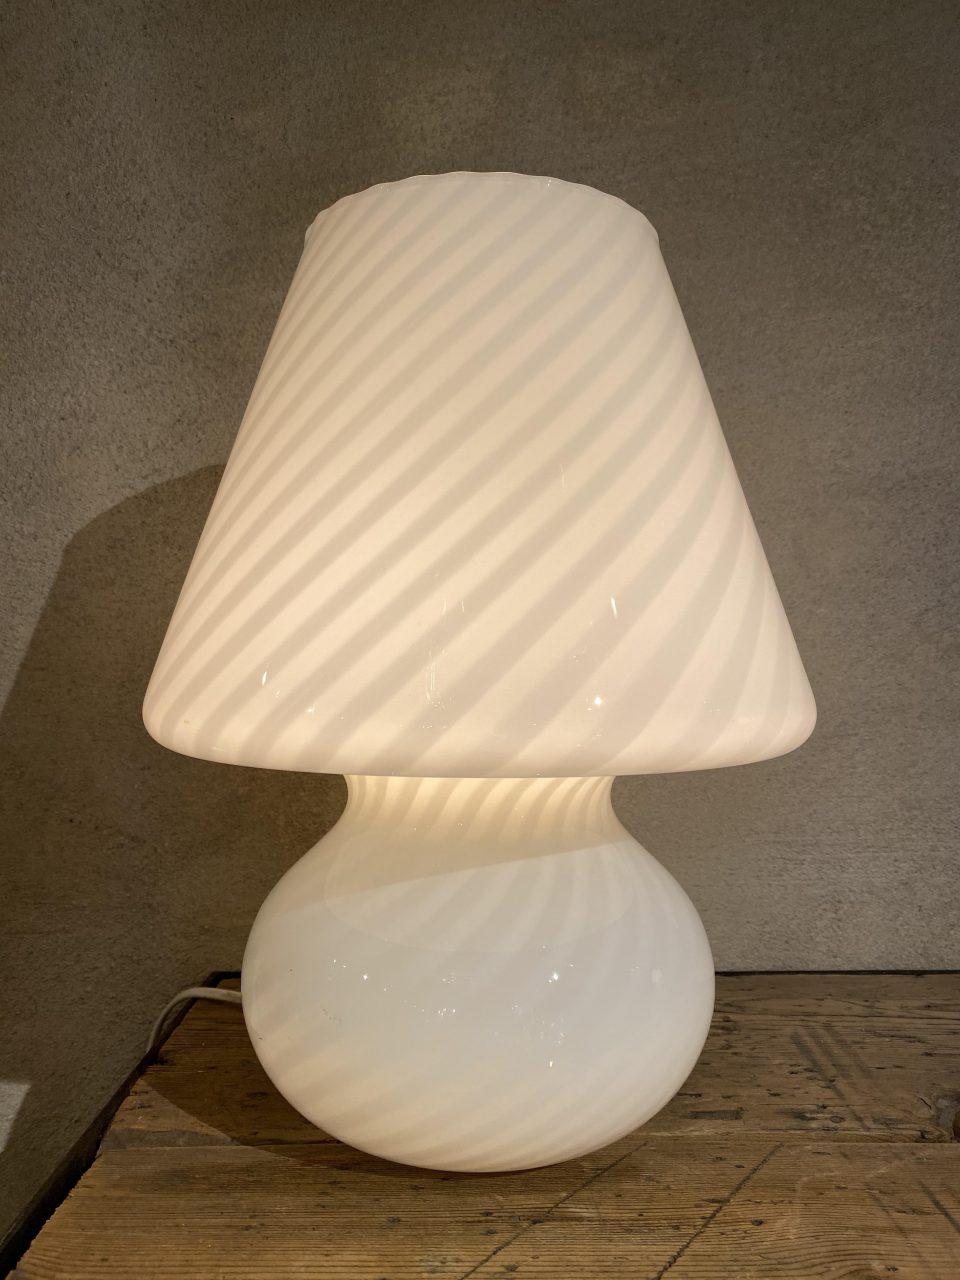 Gorgeous Murano glass table light, in an eye catching ‘mushroom’ form. Made in a wonderful milky white and with clear swirled opaque glass, which casts a stunning light when lit.

A true classic within interior design, from the 1960s-1970s.